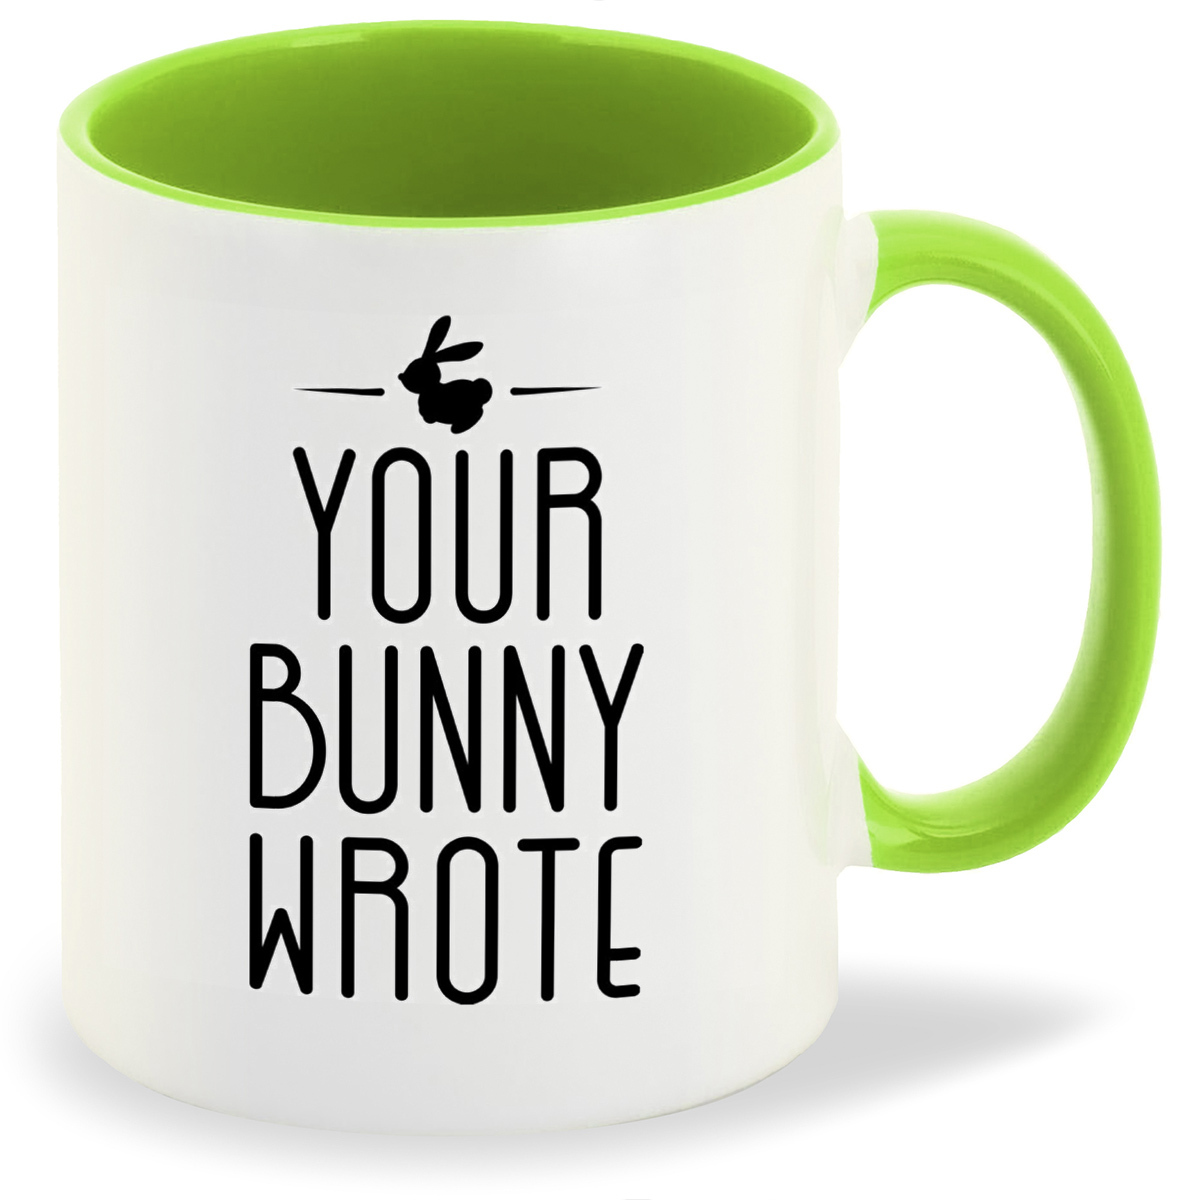 Your bunny wrote steam фото 16